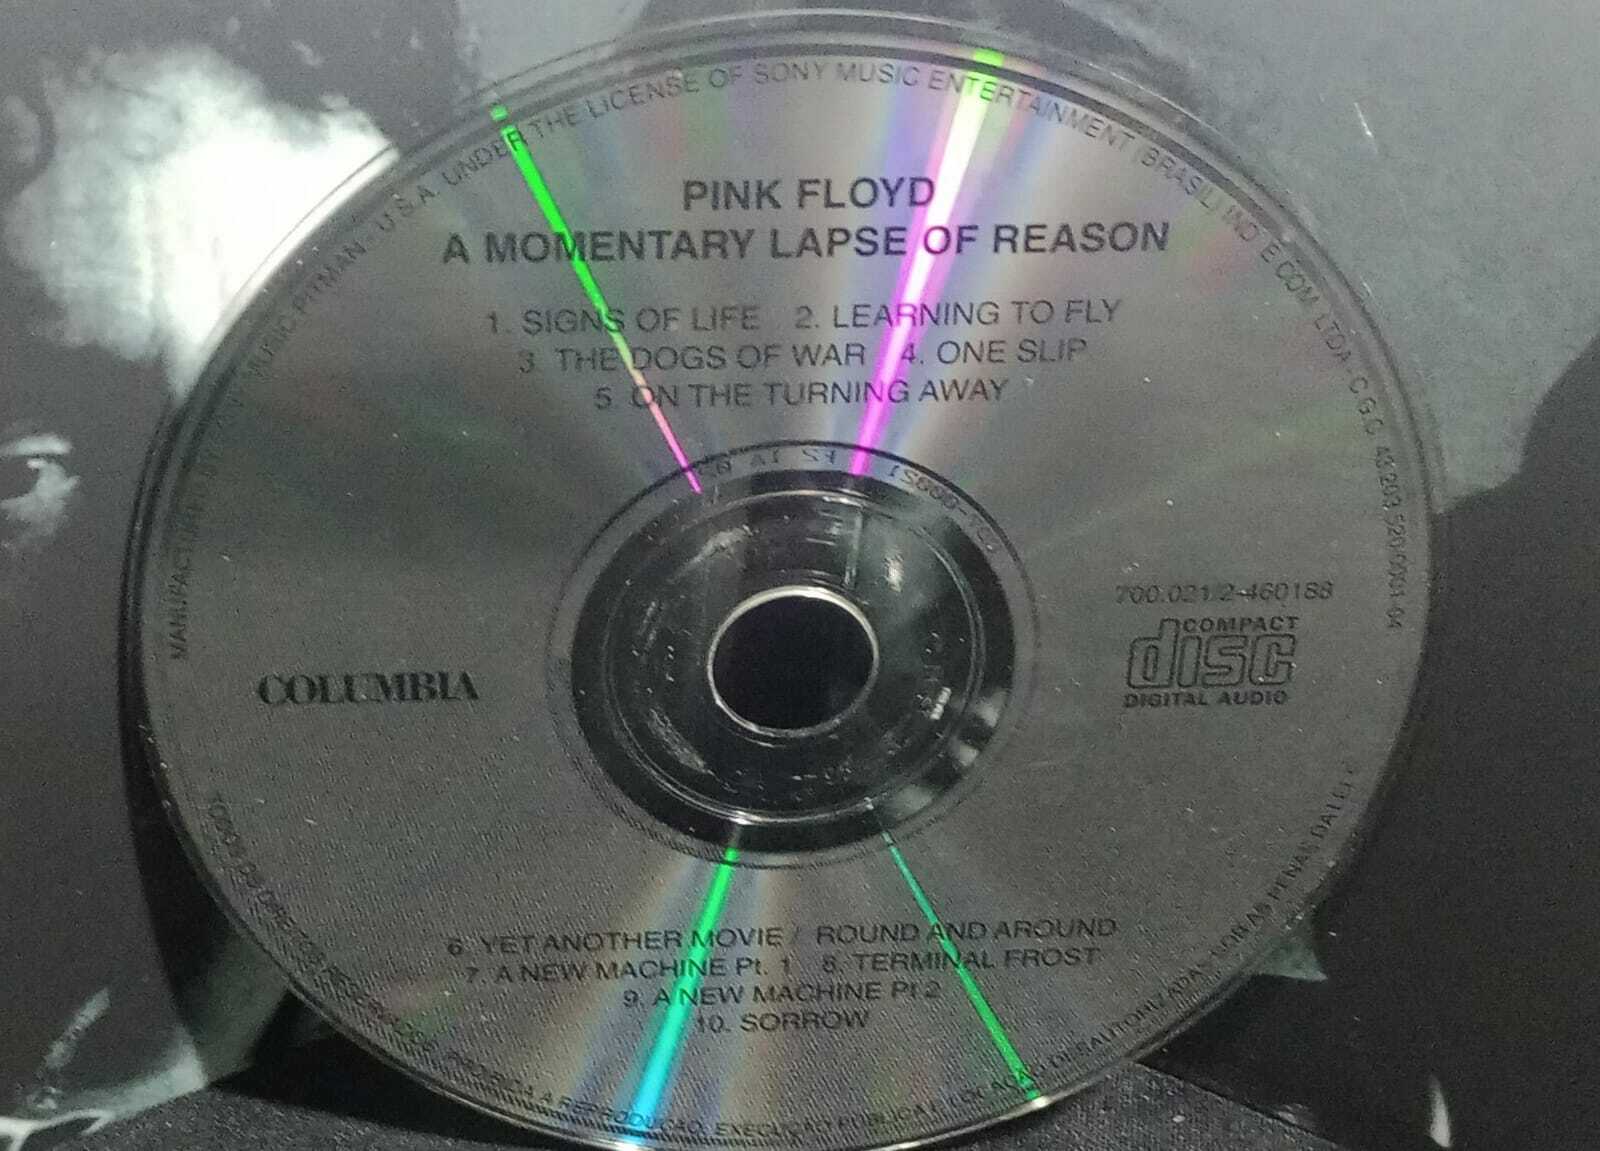 CD - Pink Floyd - a Momentary Lapse of Reason